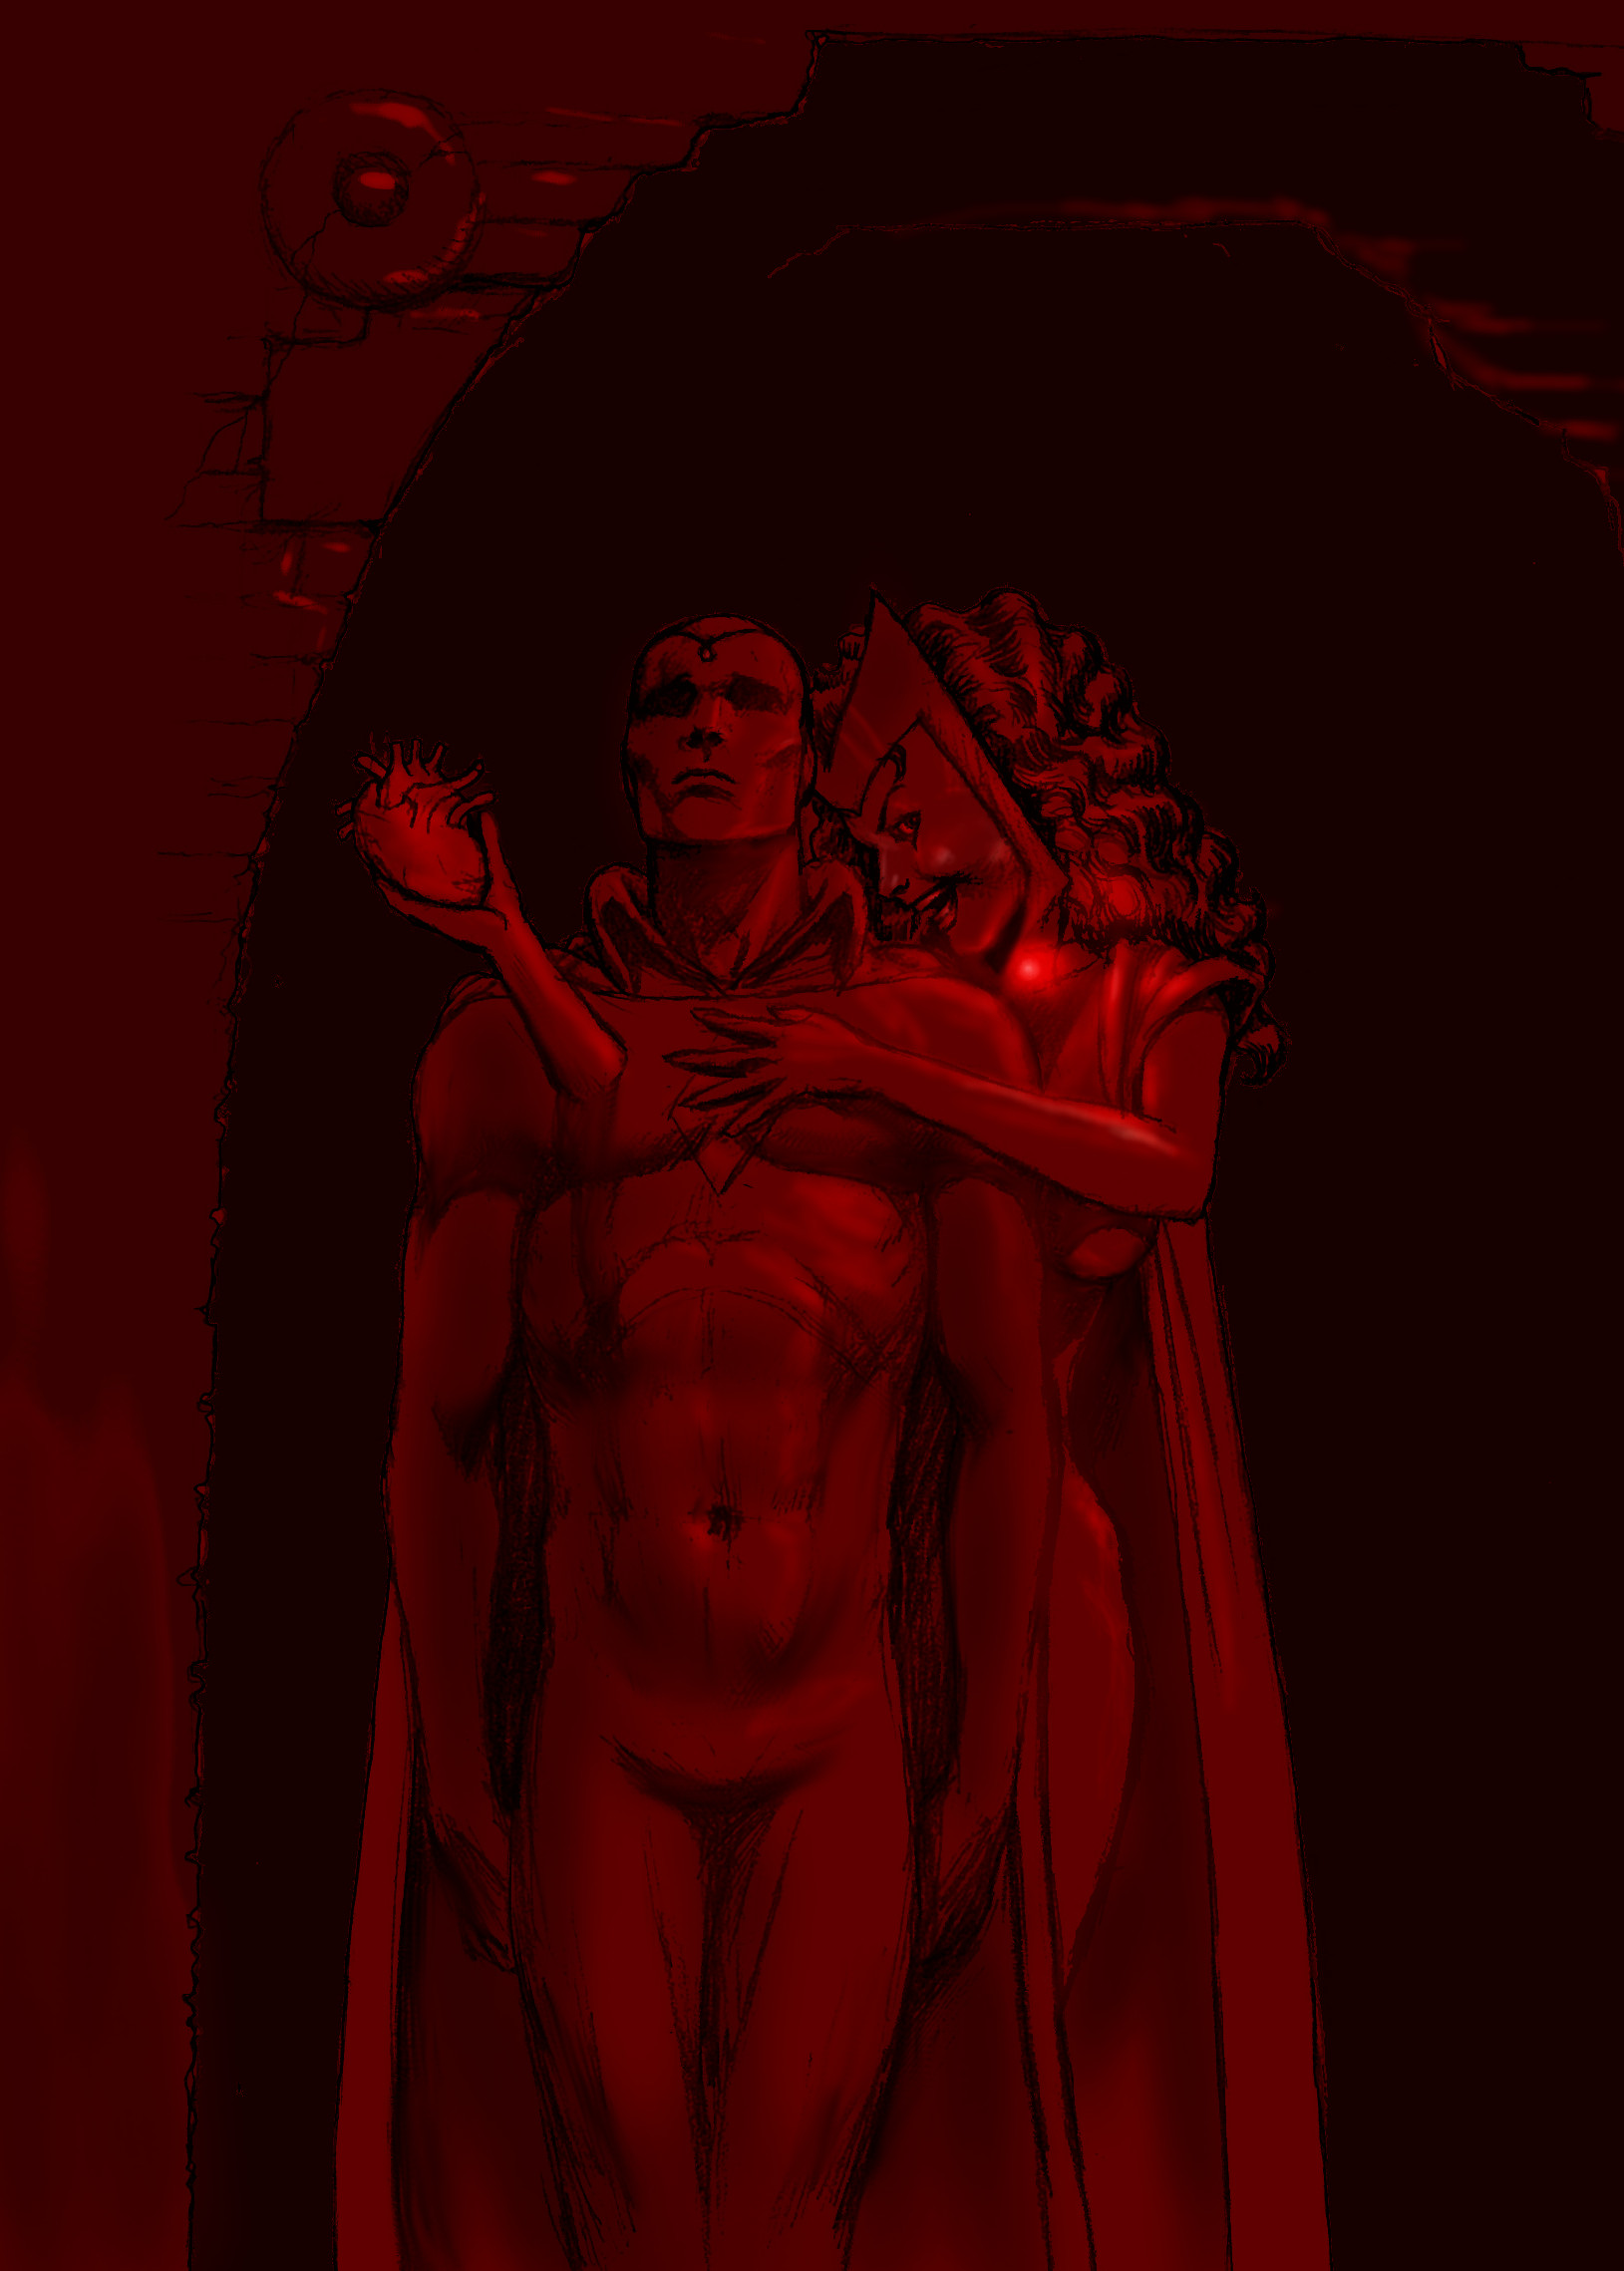 https://www.rowsdowr.com/wp-content/uploads/2013/05/Stannis-as-Vision-and-Melisandre-as-Scarlet-Witch-by-Nick-Perks.jpg